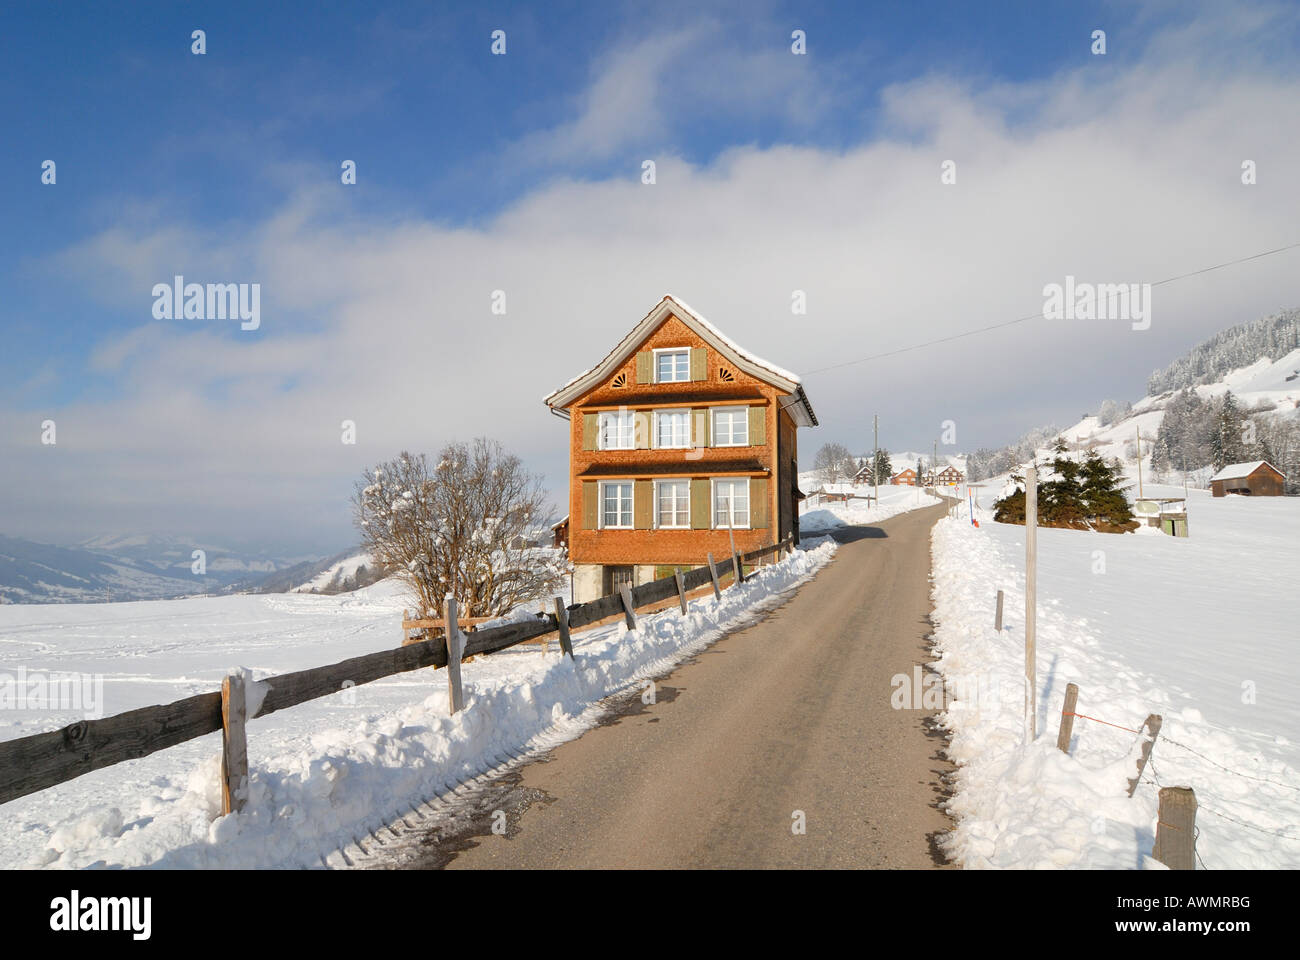 A traditional built house in the swiss alps - Kanton of St. Gallen, Switzerland, Europe. Stock Photo